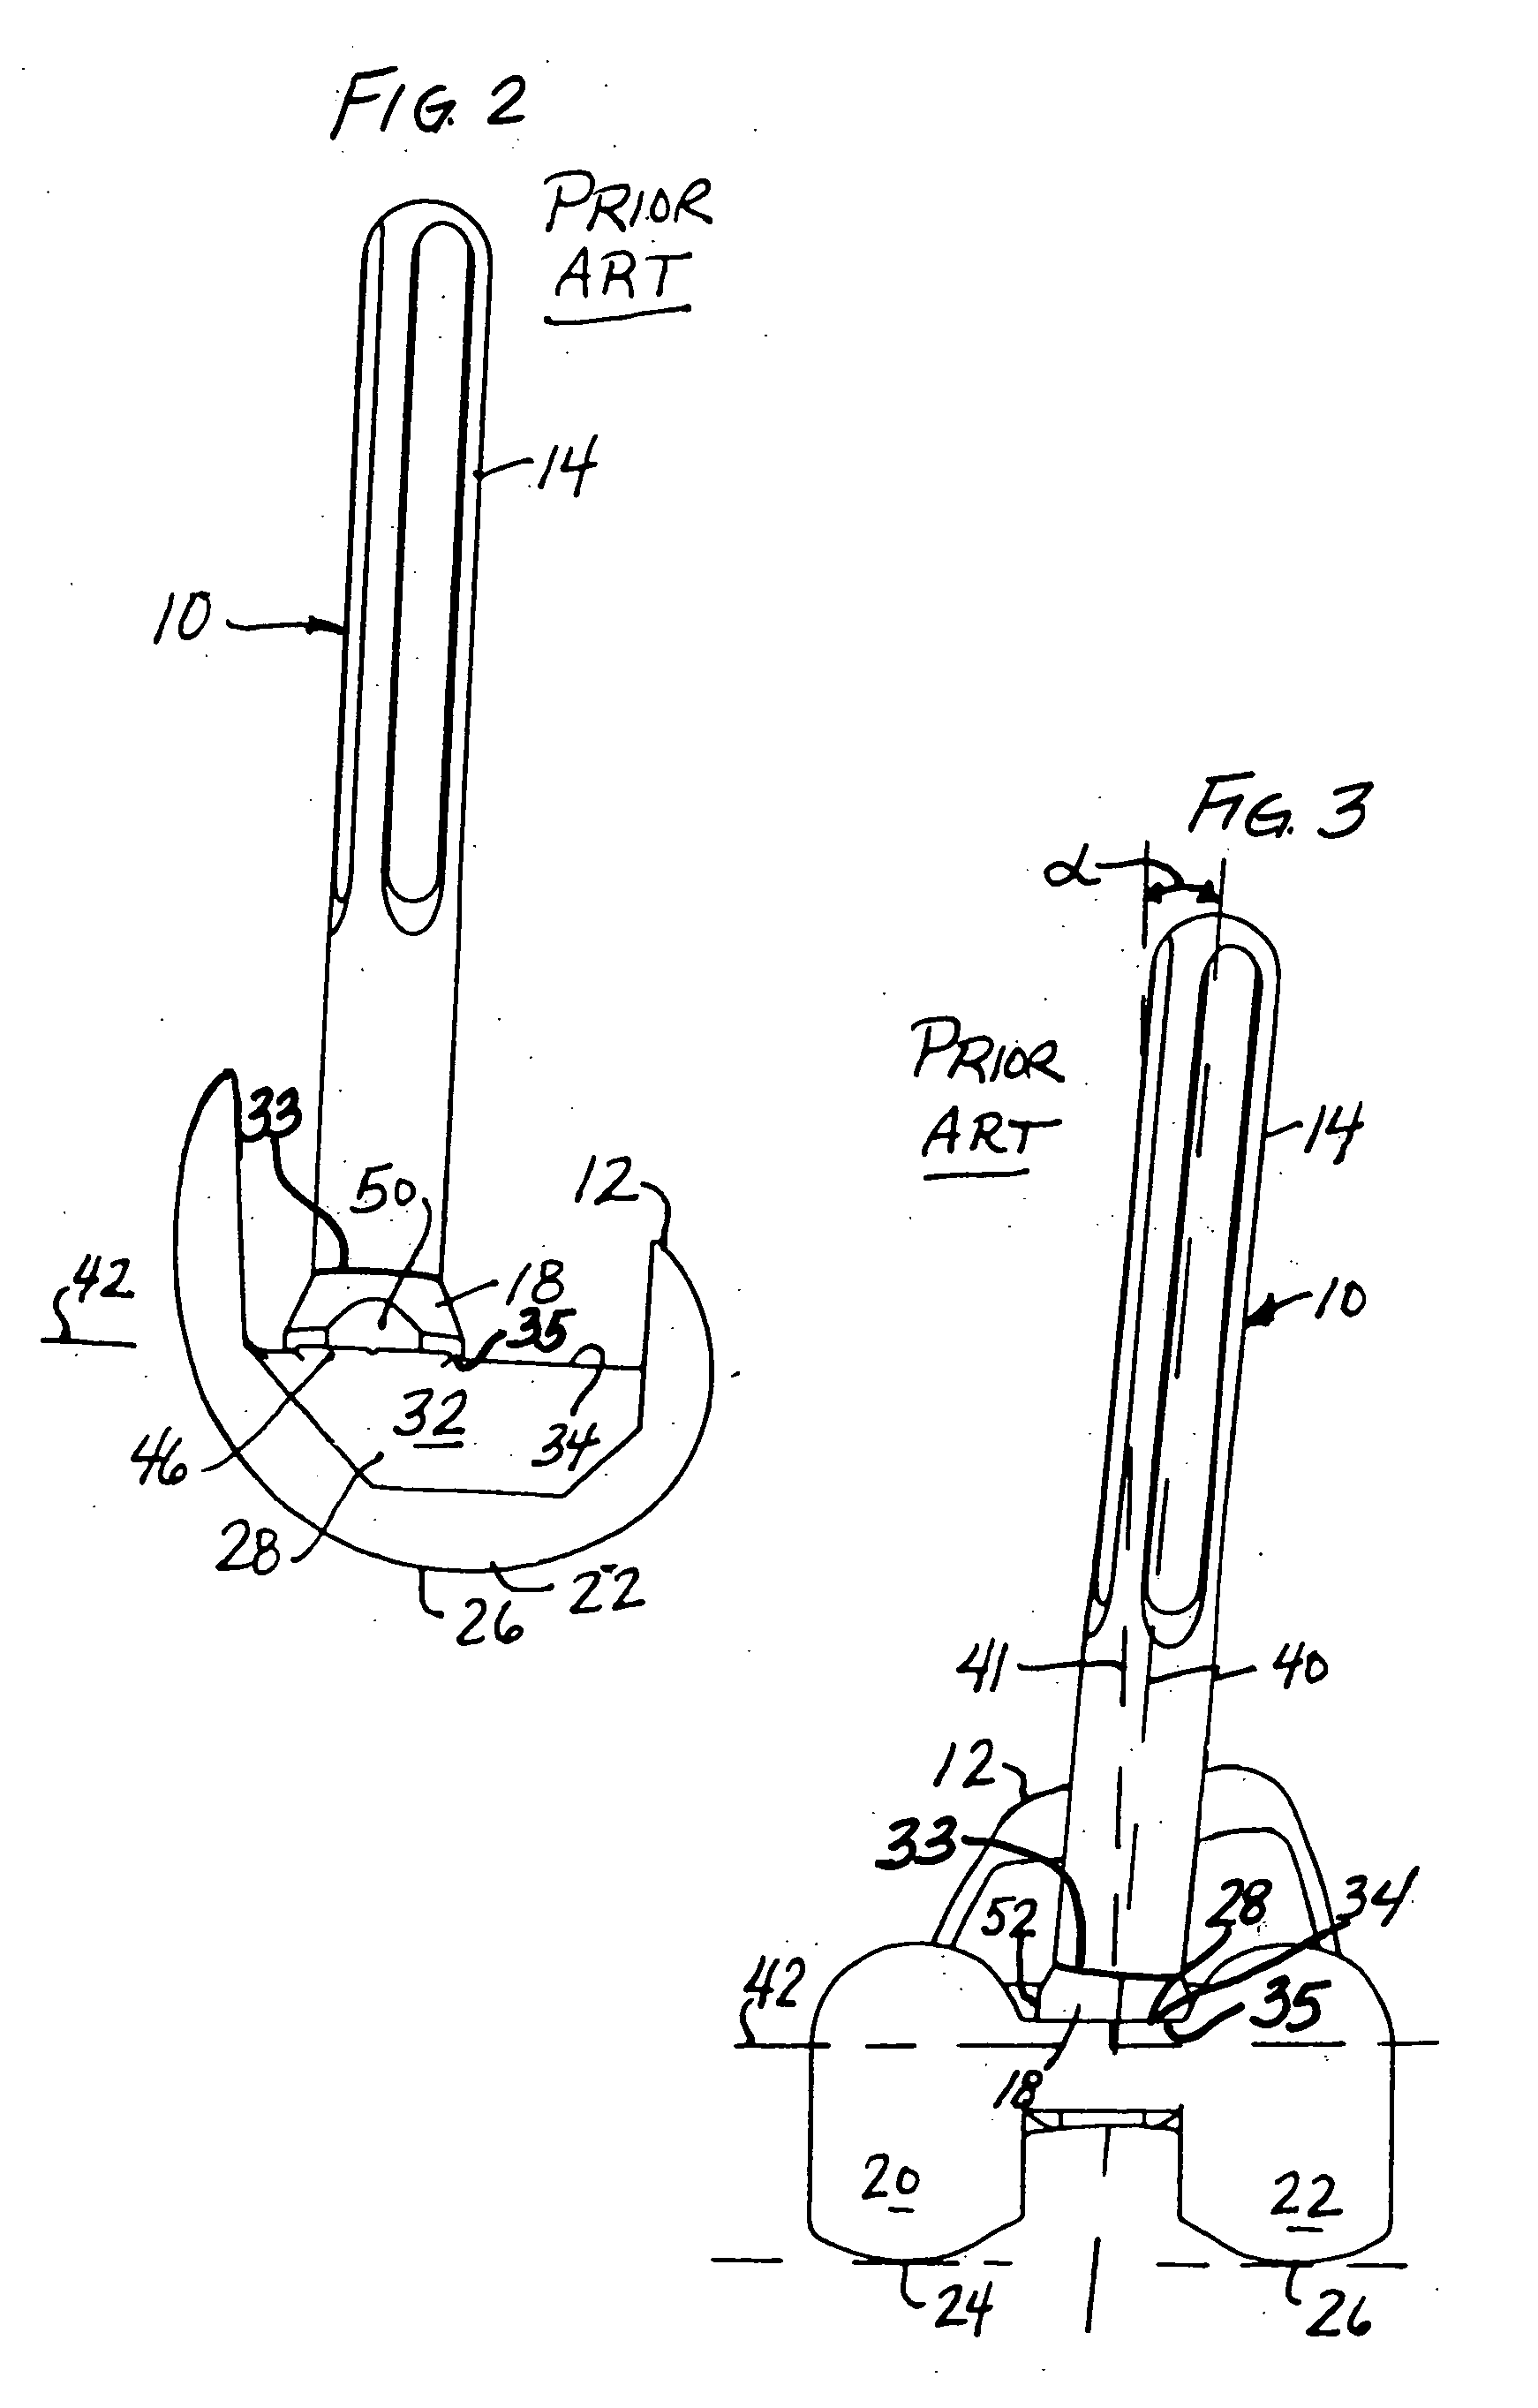 Modular orthopaedic implant system with multi-use stems